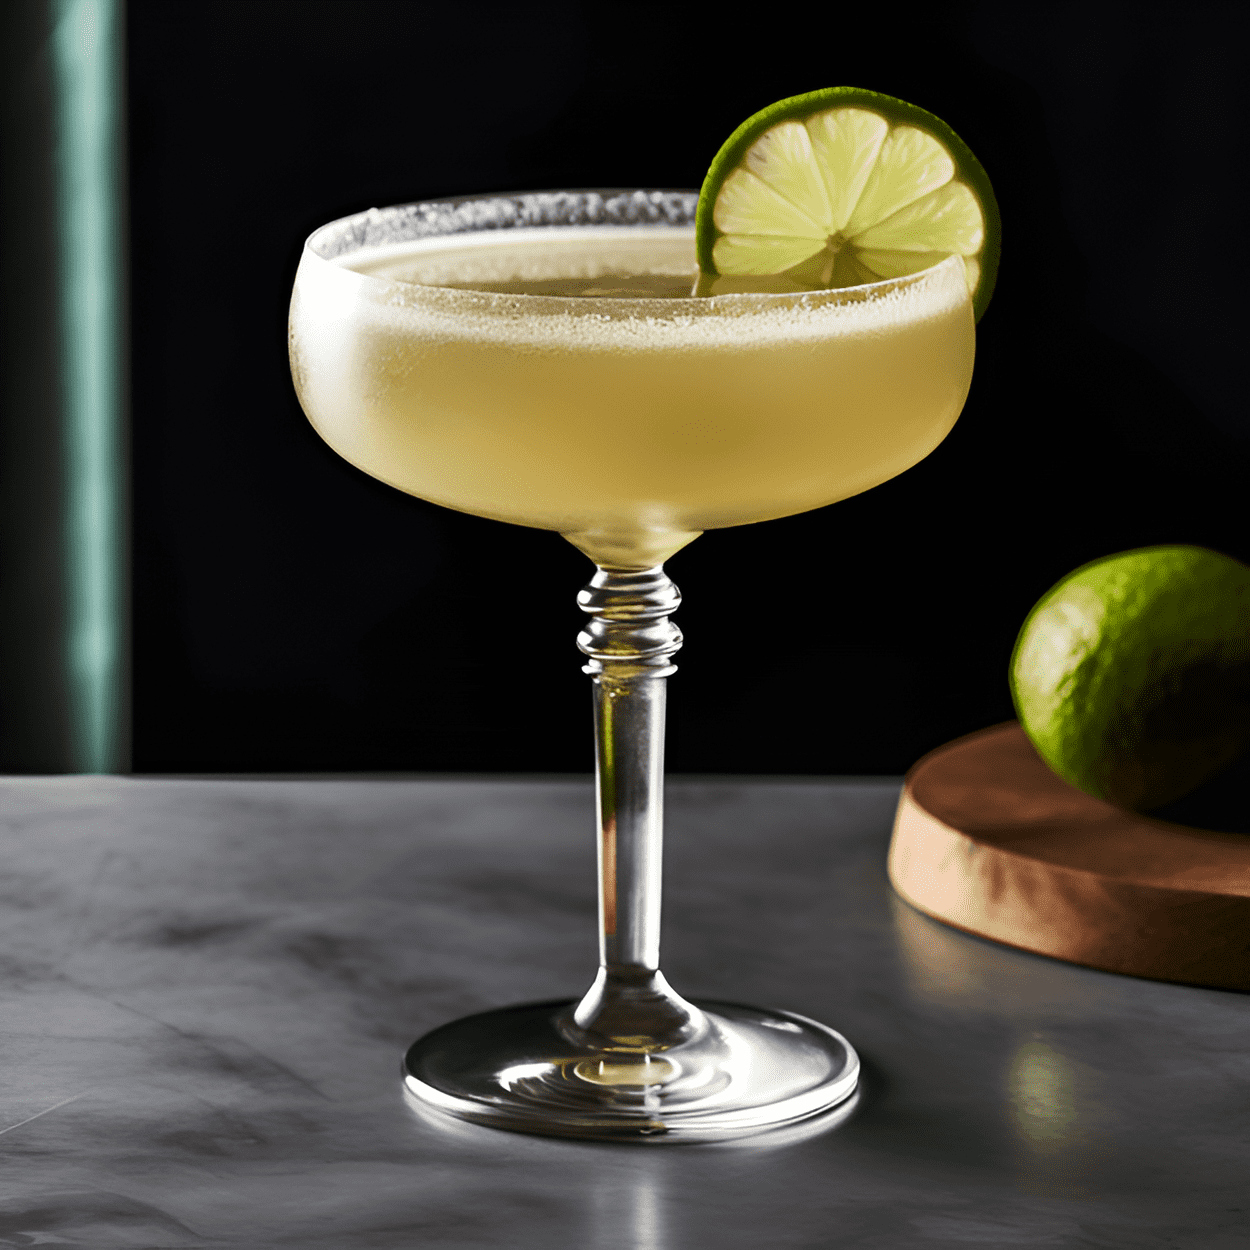 Spiced Daiquiri Cocktail Recipe - The Spiced Daiquiri is a harmonious blend of sweet, sour, and spicy. The sweetness of the rum and sugar balance the tartness of the lime juice, while the added spices give it a fiery kick. It's a refreshing, invigorating, and bold cocktail.